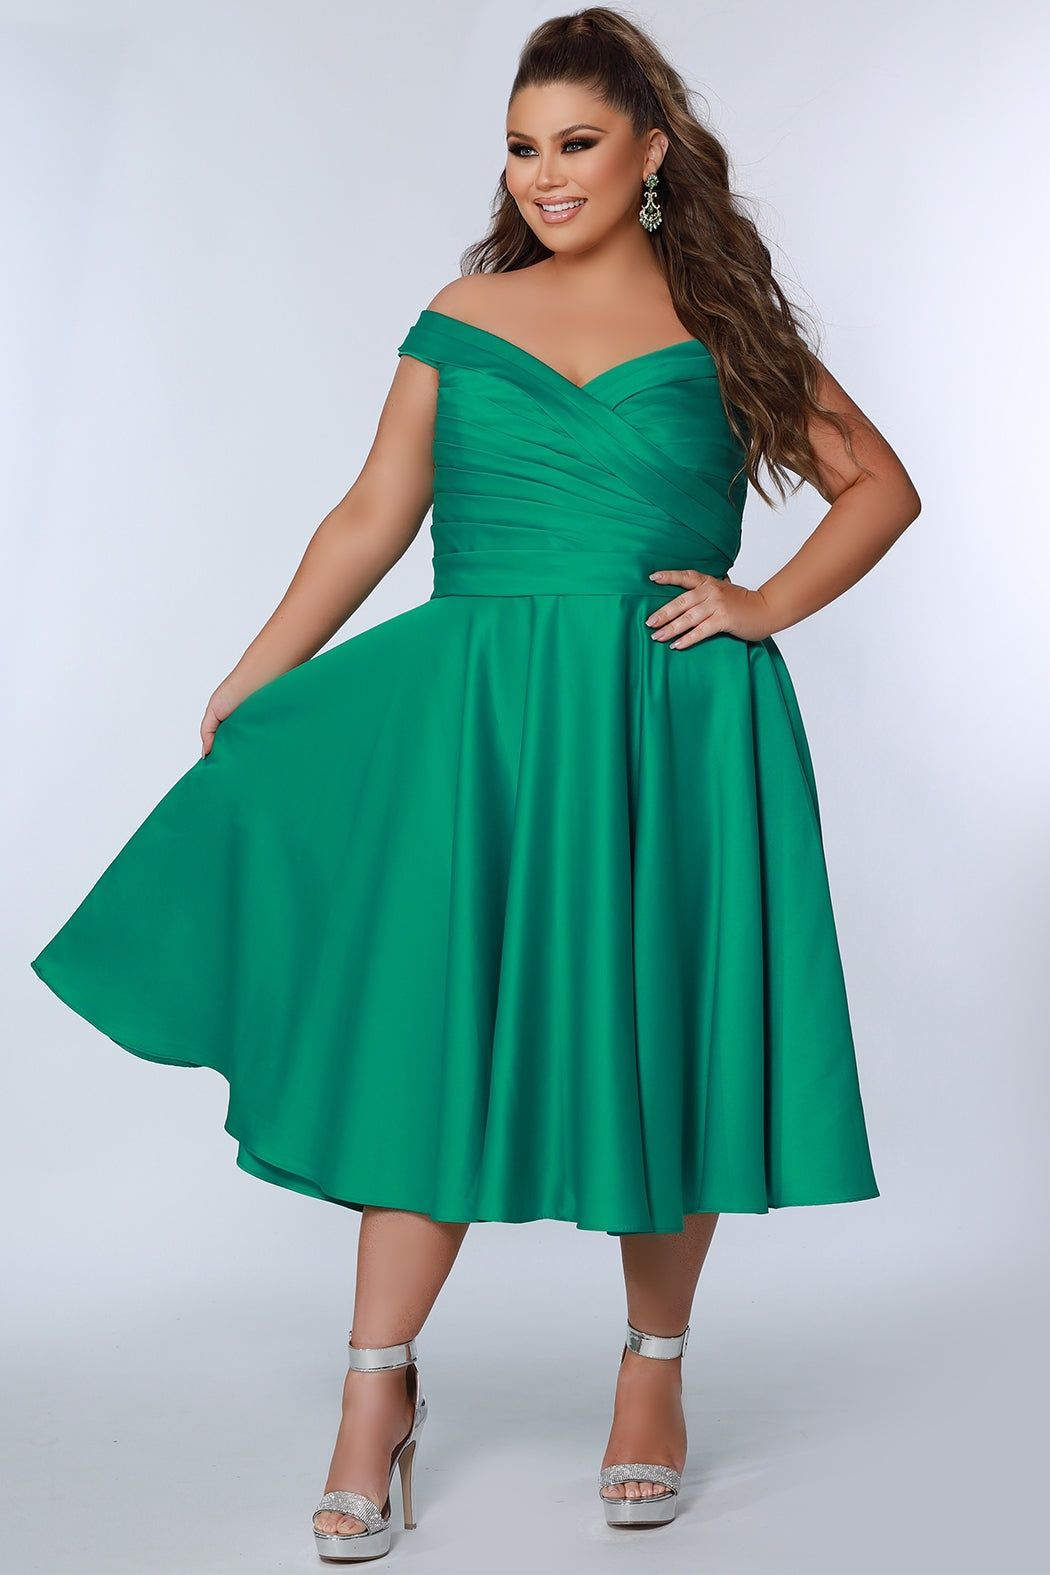 Style CE2301 Sydney's Closet Size 14 Satin Emerald Green Cocktail Dress on Queenly